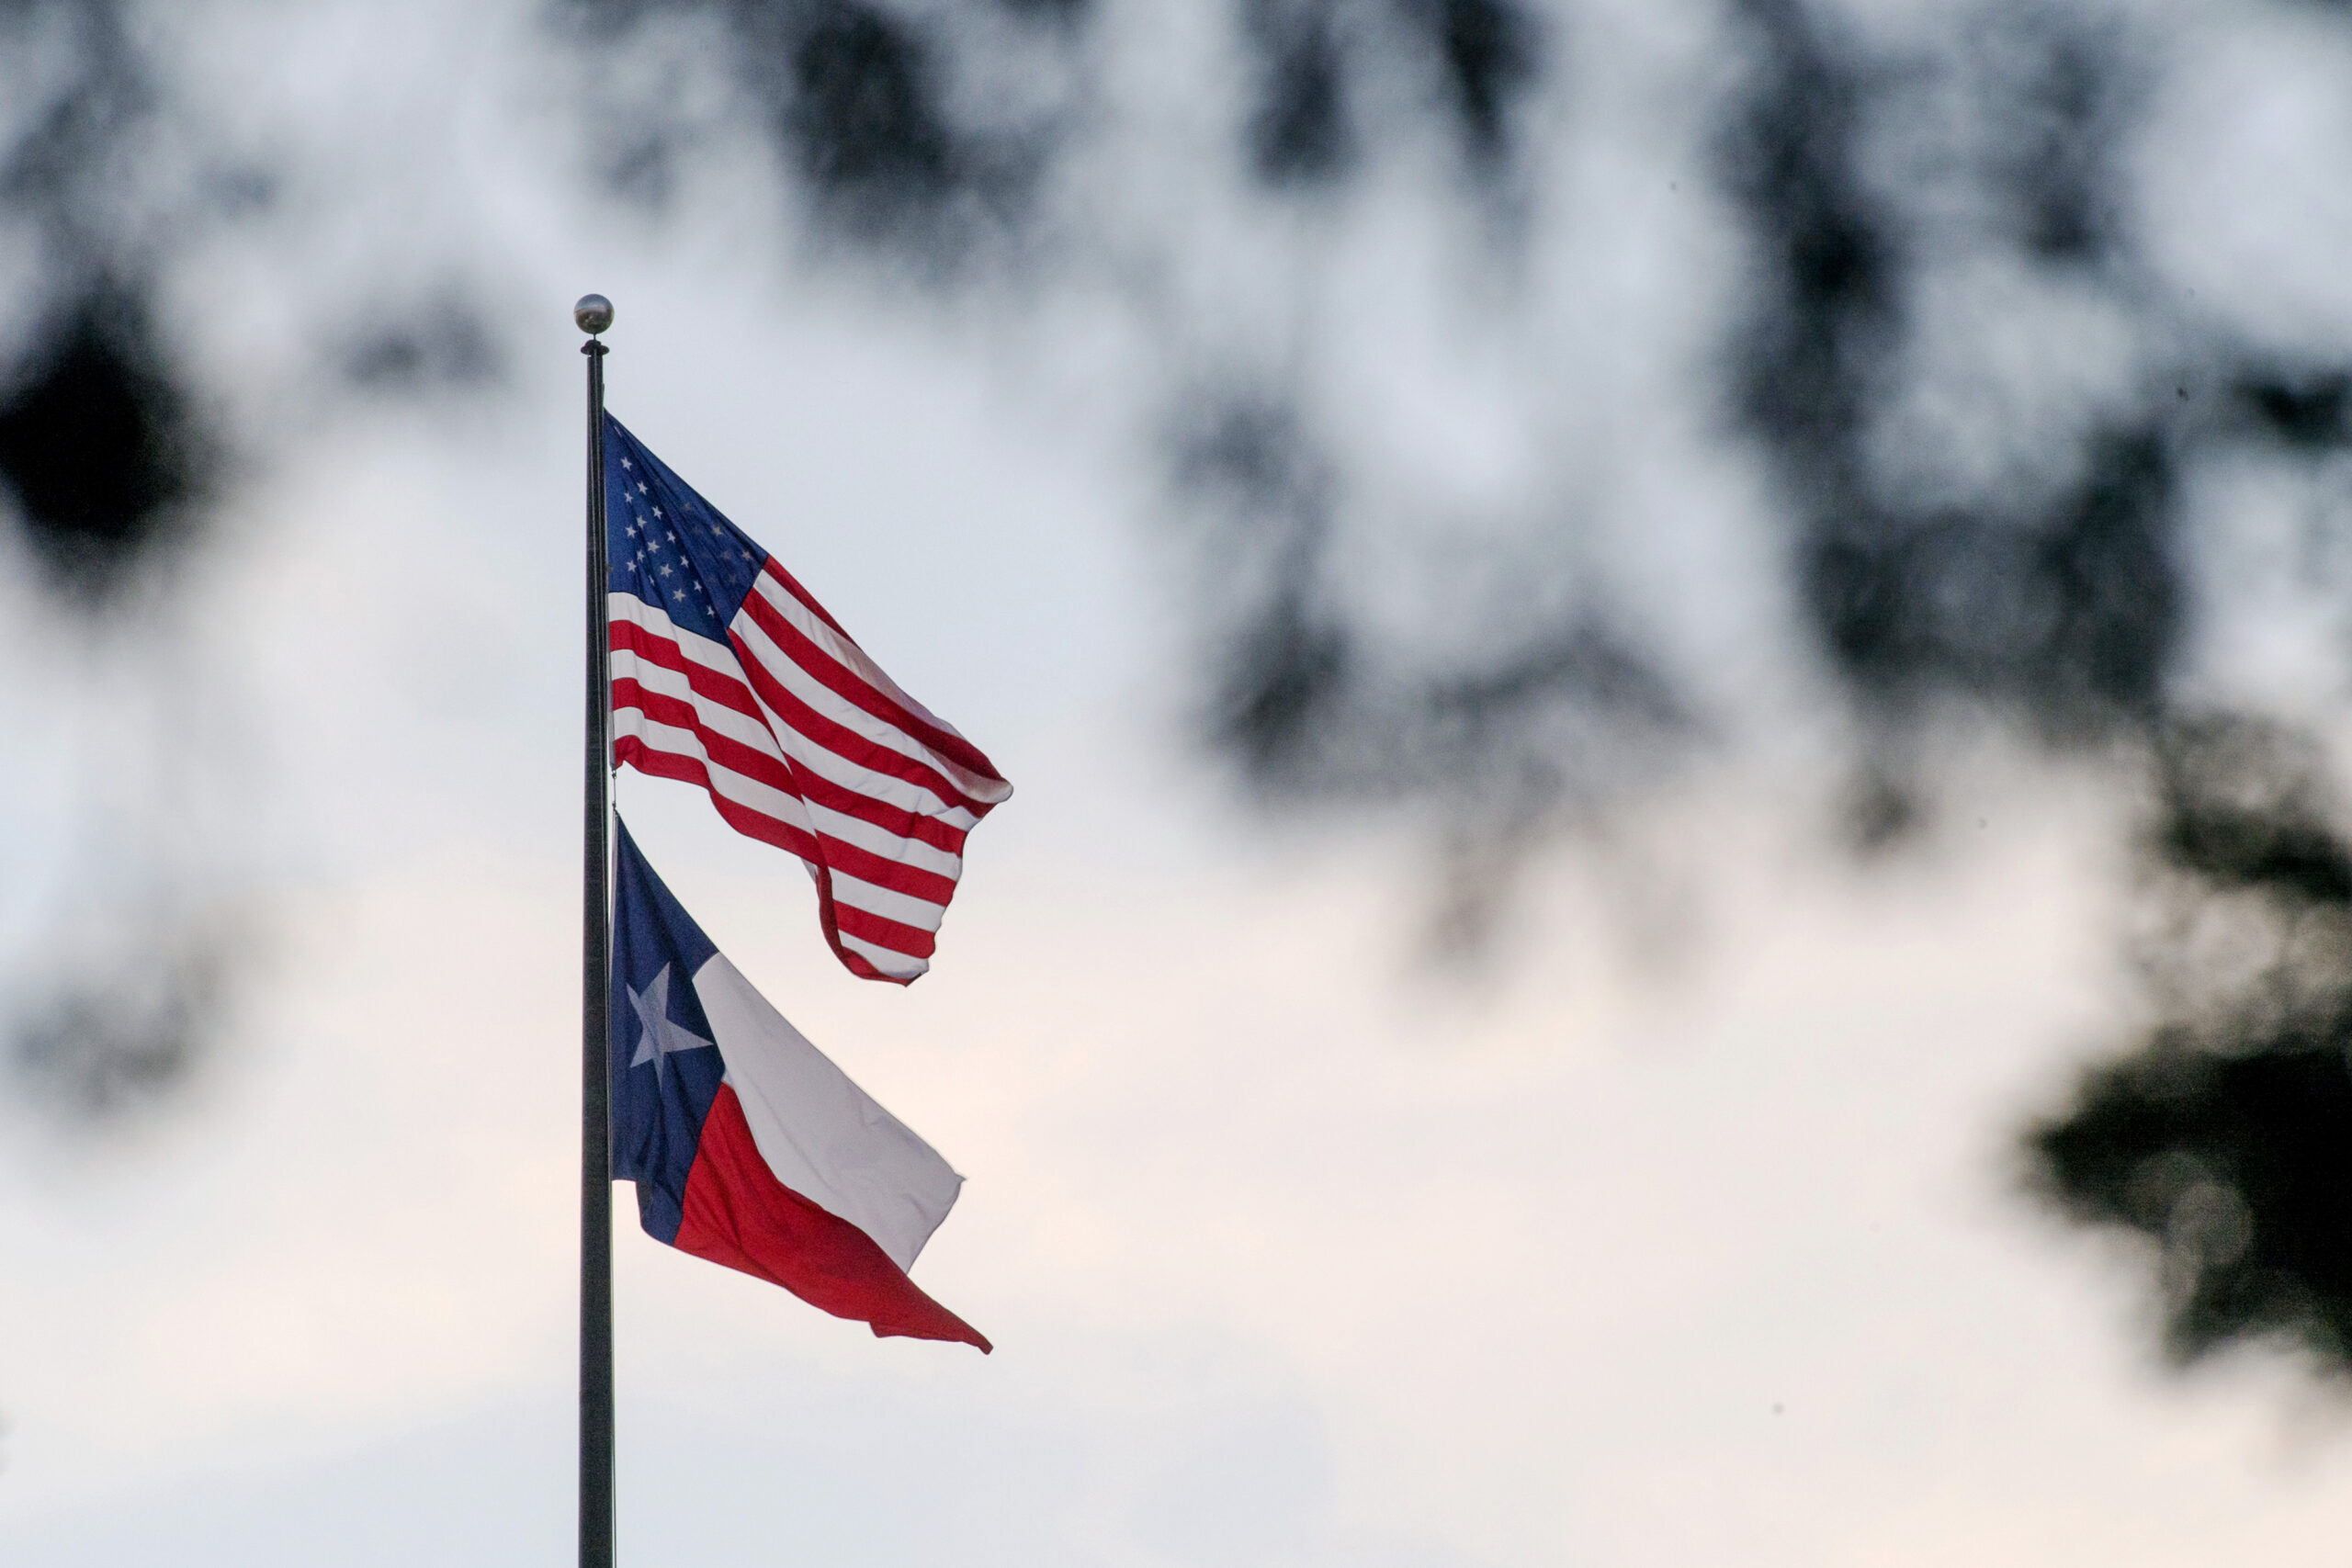 Texas Lawmaker Files ‘TEXIT’ Bill To Prompt Citizen Vote On Exploring Secession From U.S.